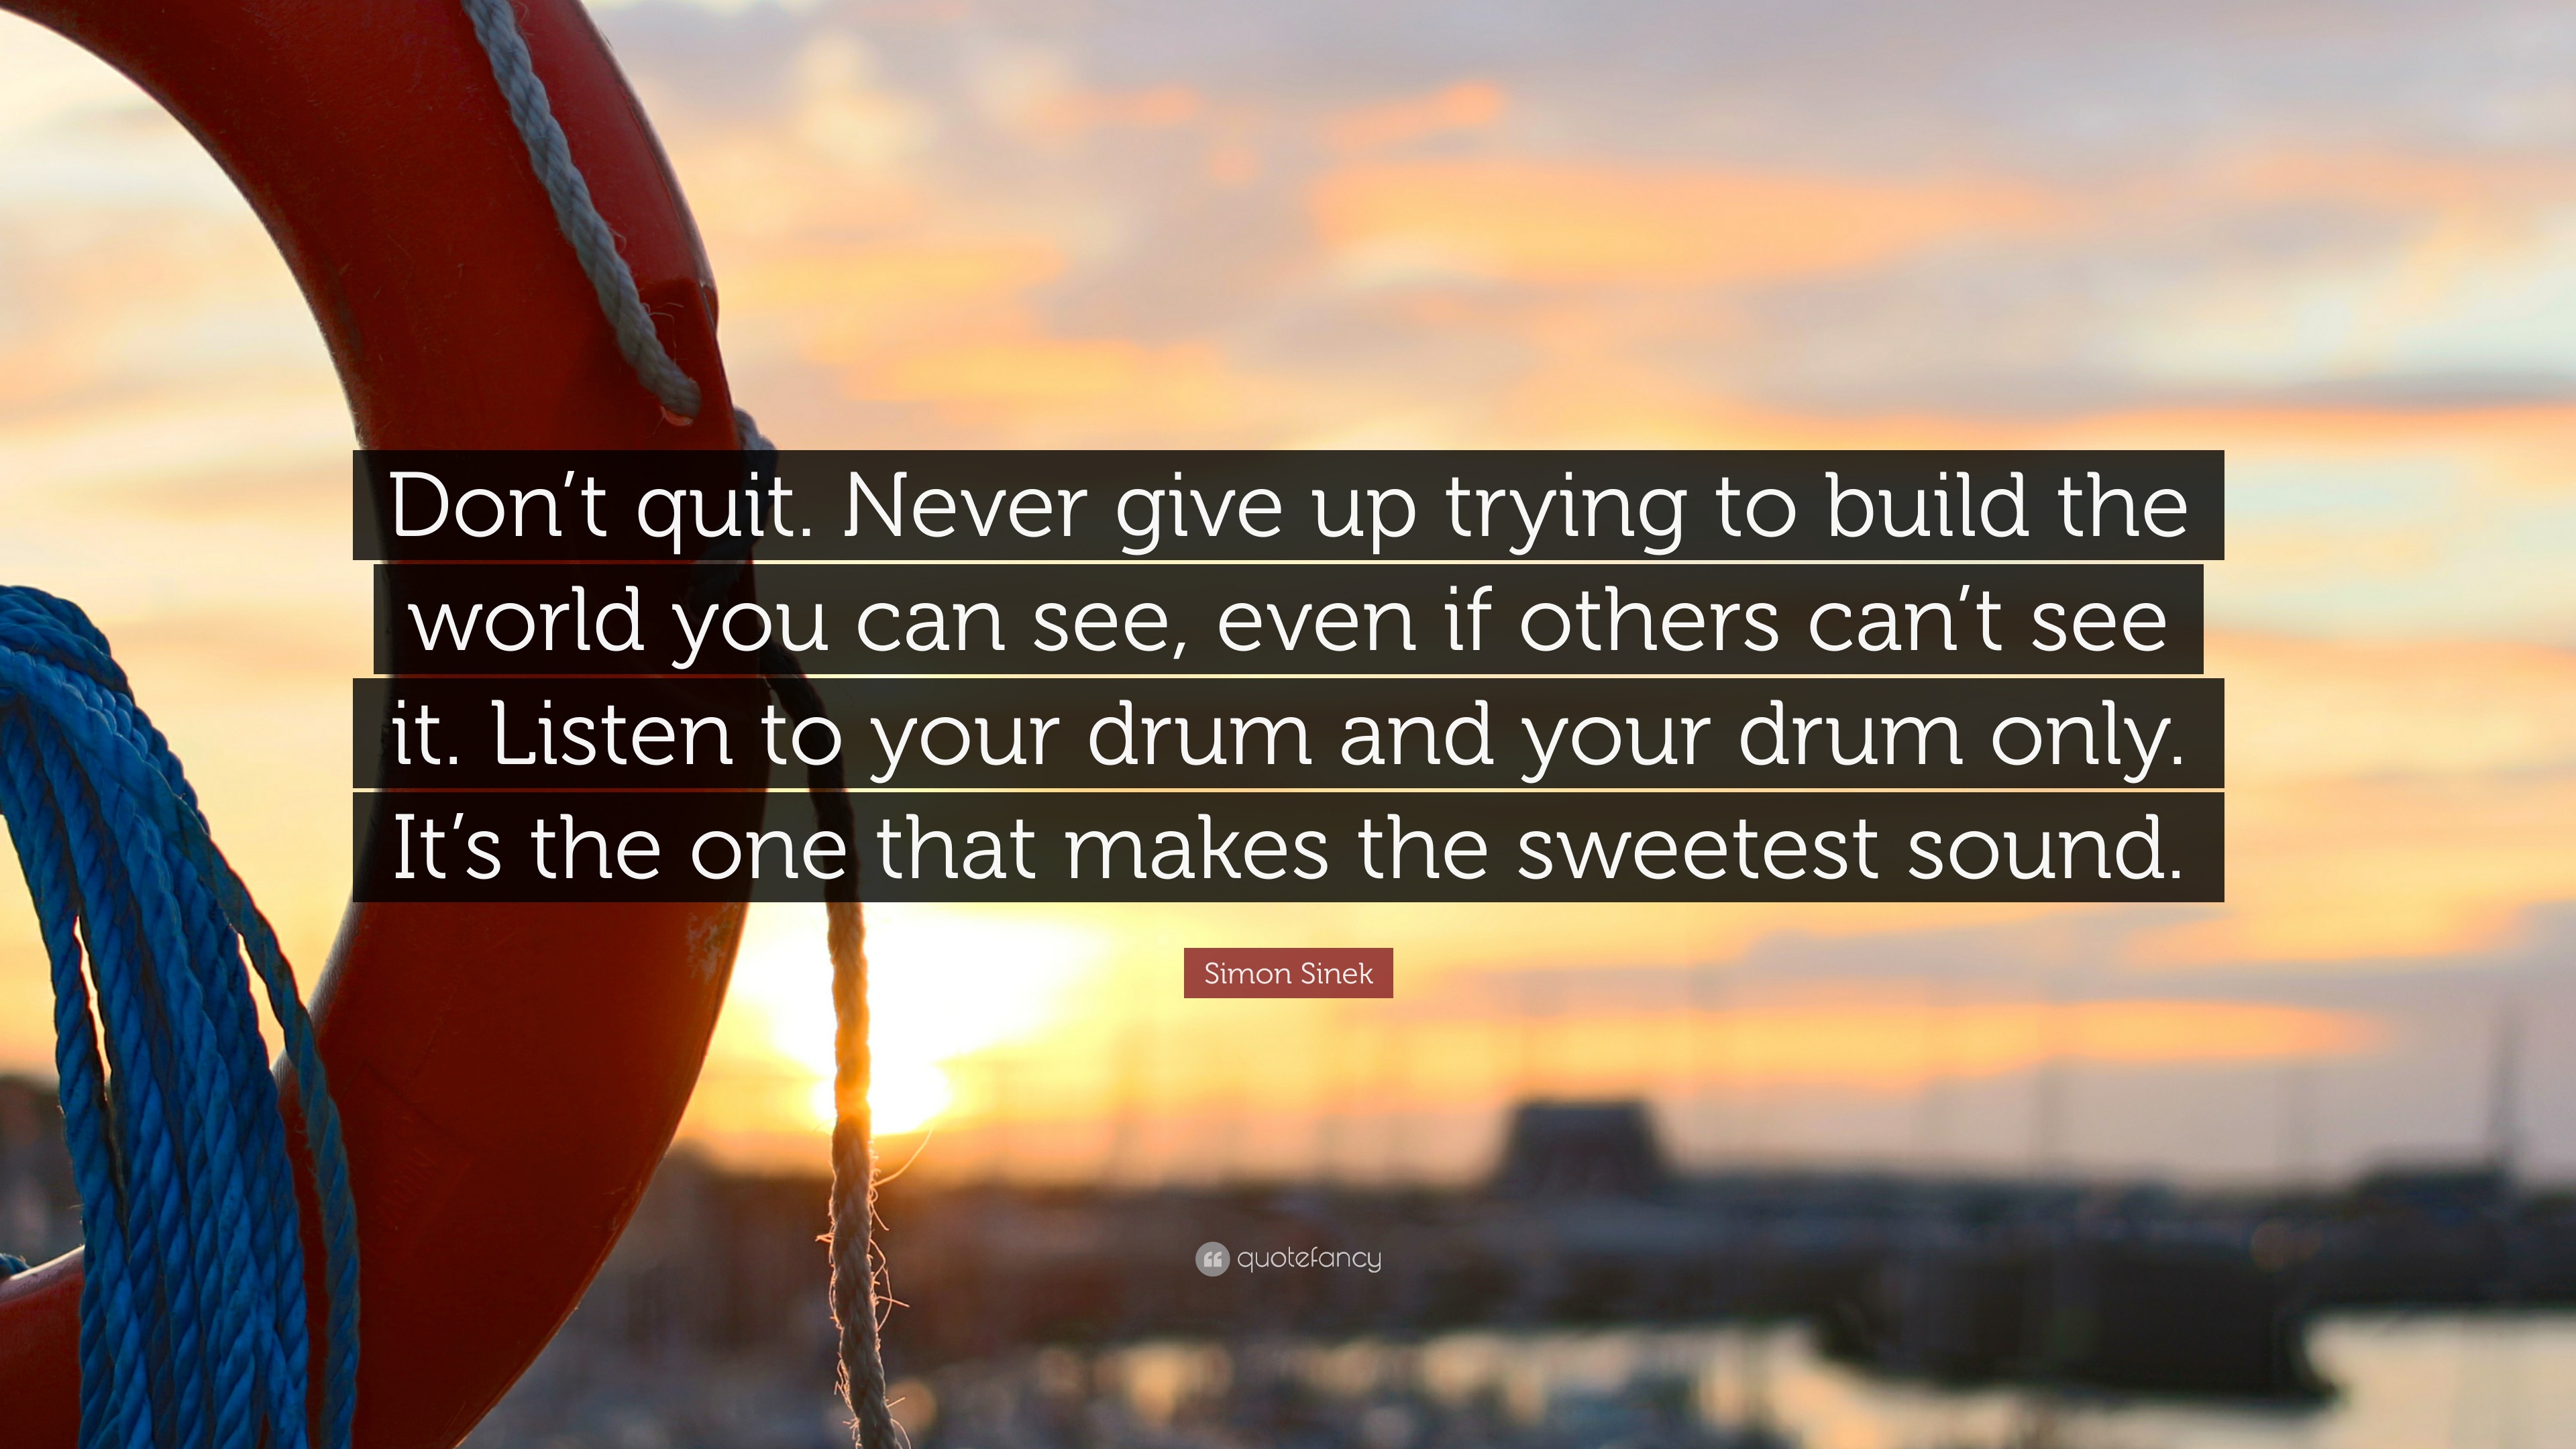 Simon Sinek Quote “Don t quit Never give up trying to build